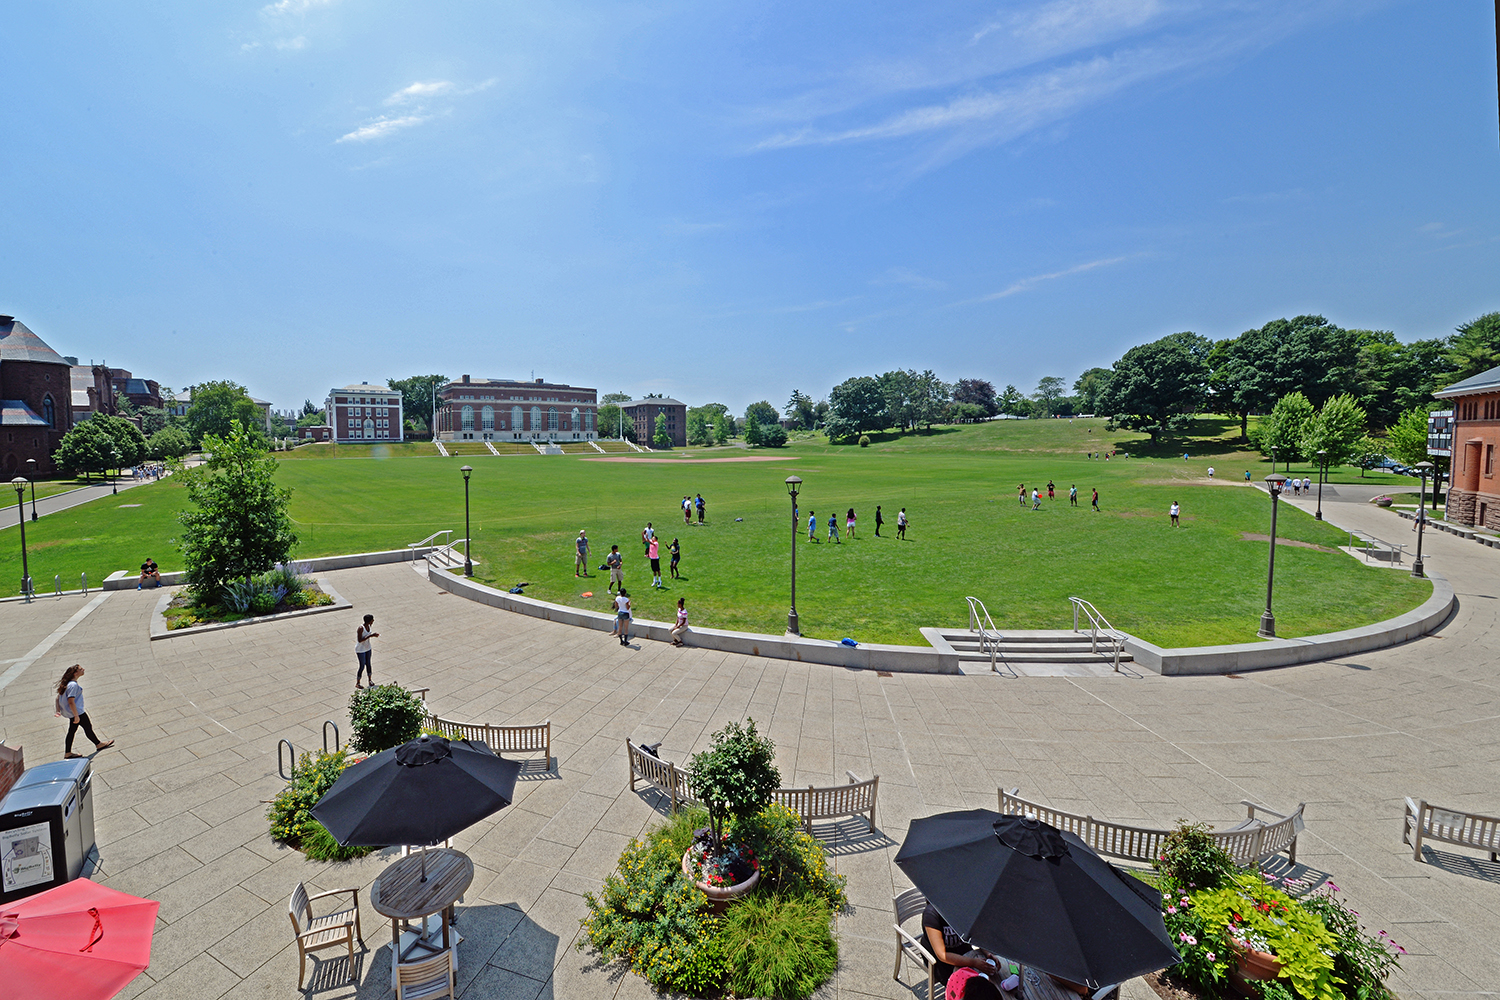 The six-week academic summer program offers intensive math, science, writing and language training; counseling, mentoring and academic support services; exposure to Wesleyan's faculty members who do research in mathematics and the sciences; and education or counseling services designed to improve the financial and economic literacy of students. 